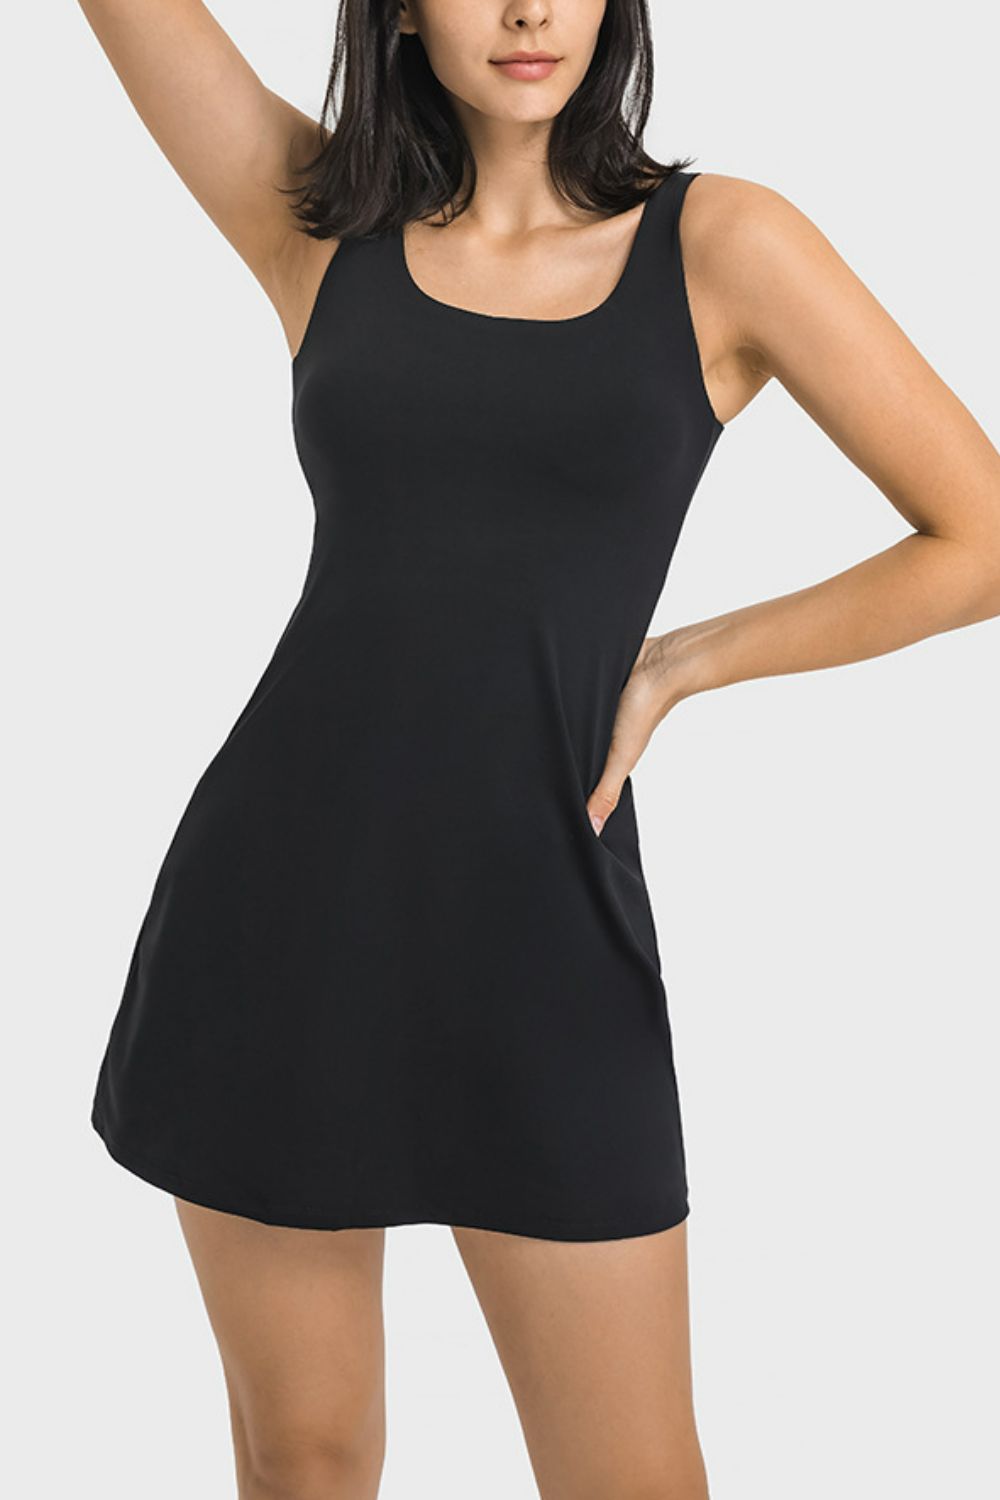 Tennis Babe Tank Dress with Full Coverage Bottoms